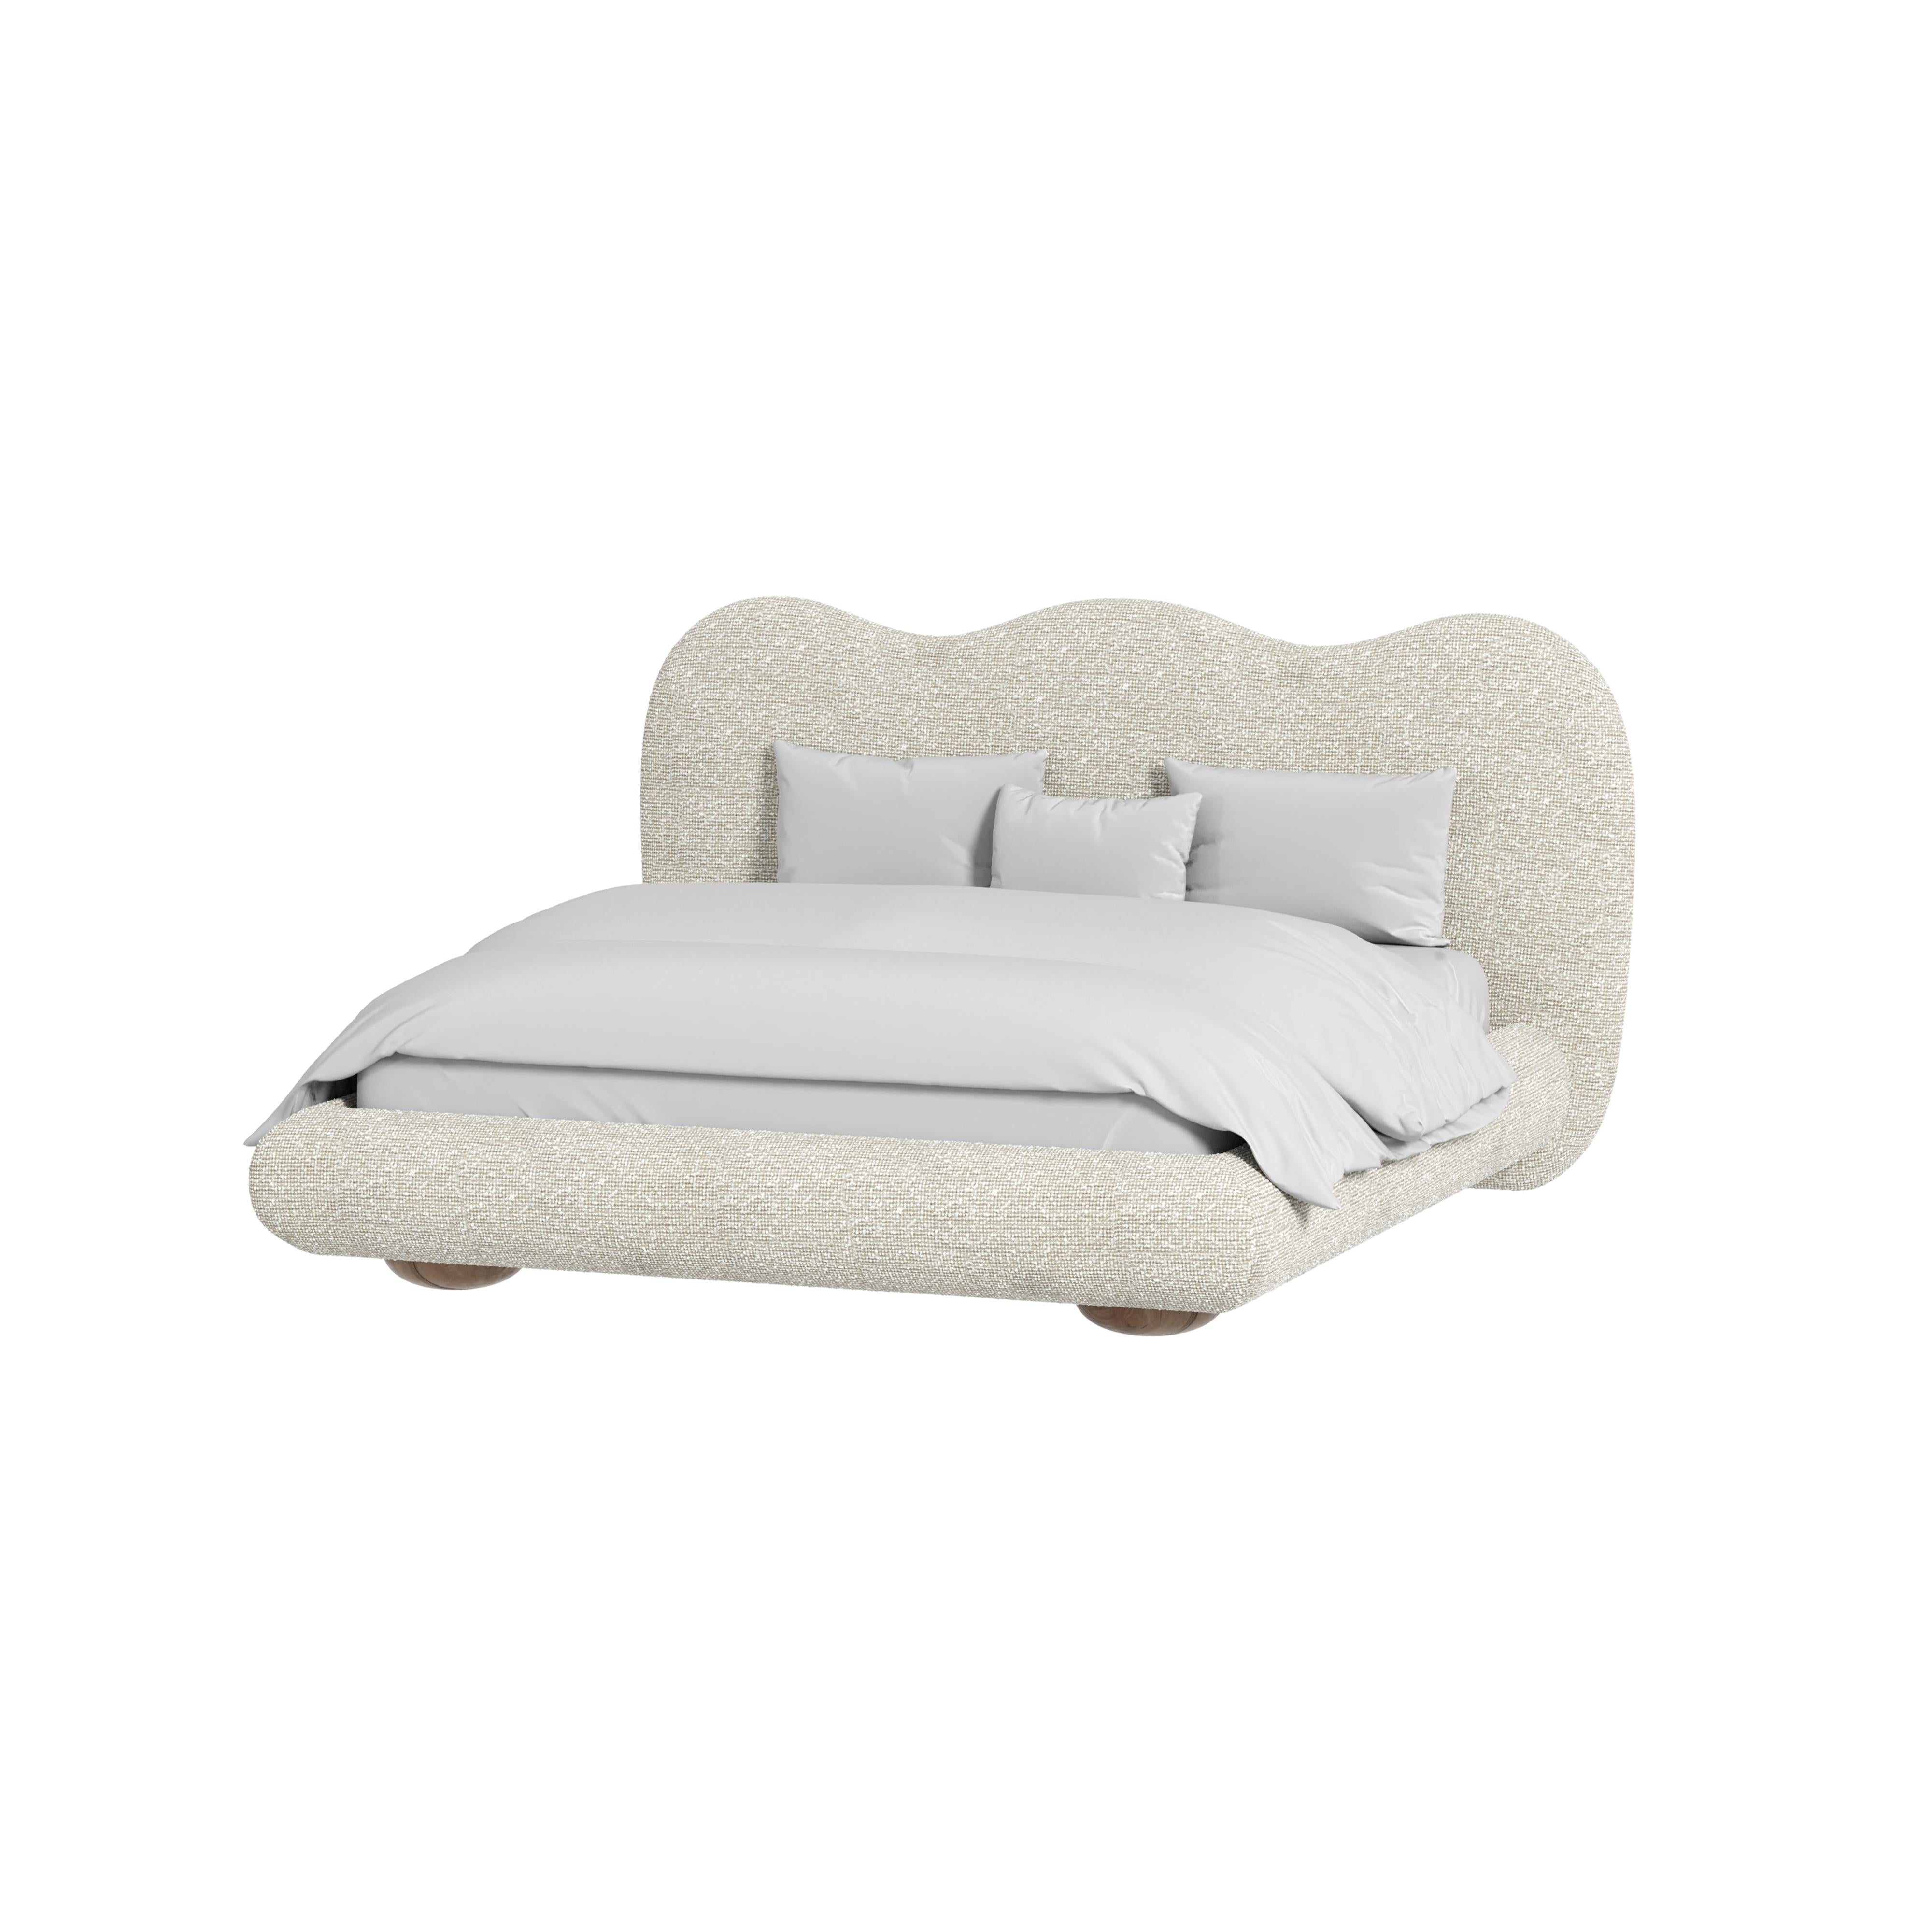 American Dandy King Bed Offered In Camio Textured Boucle Fabric For Sale